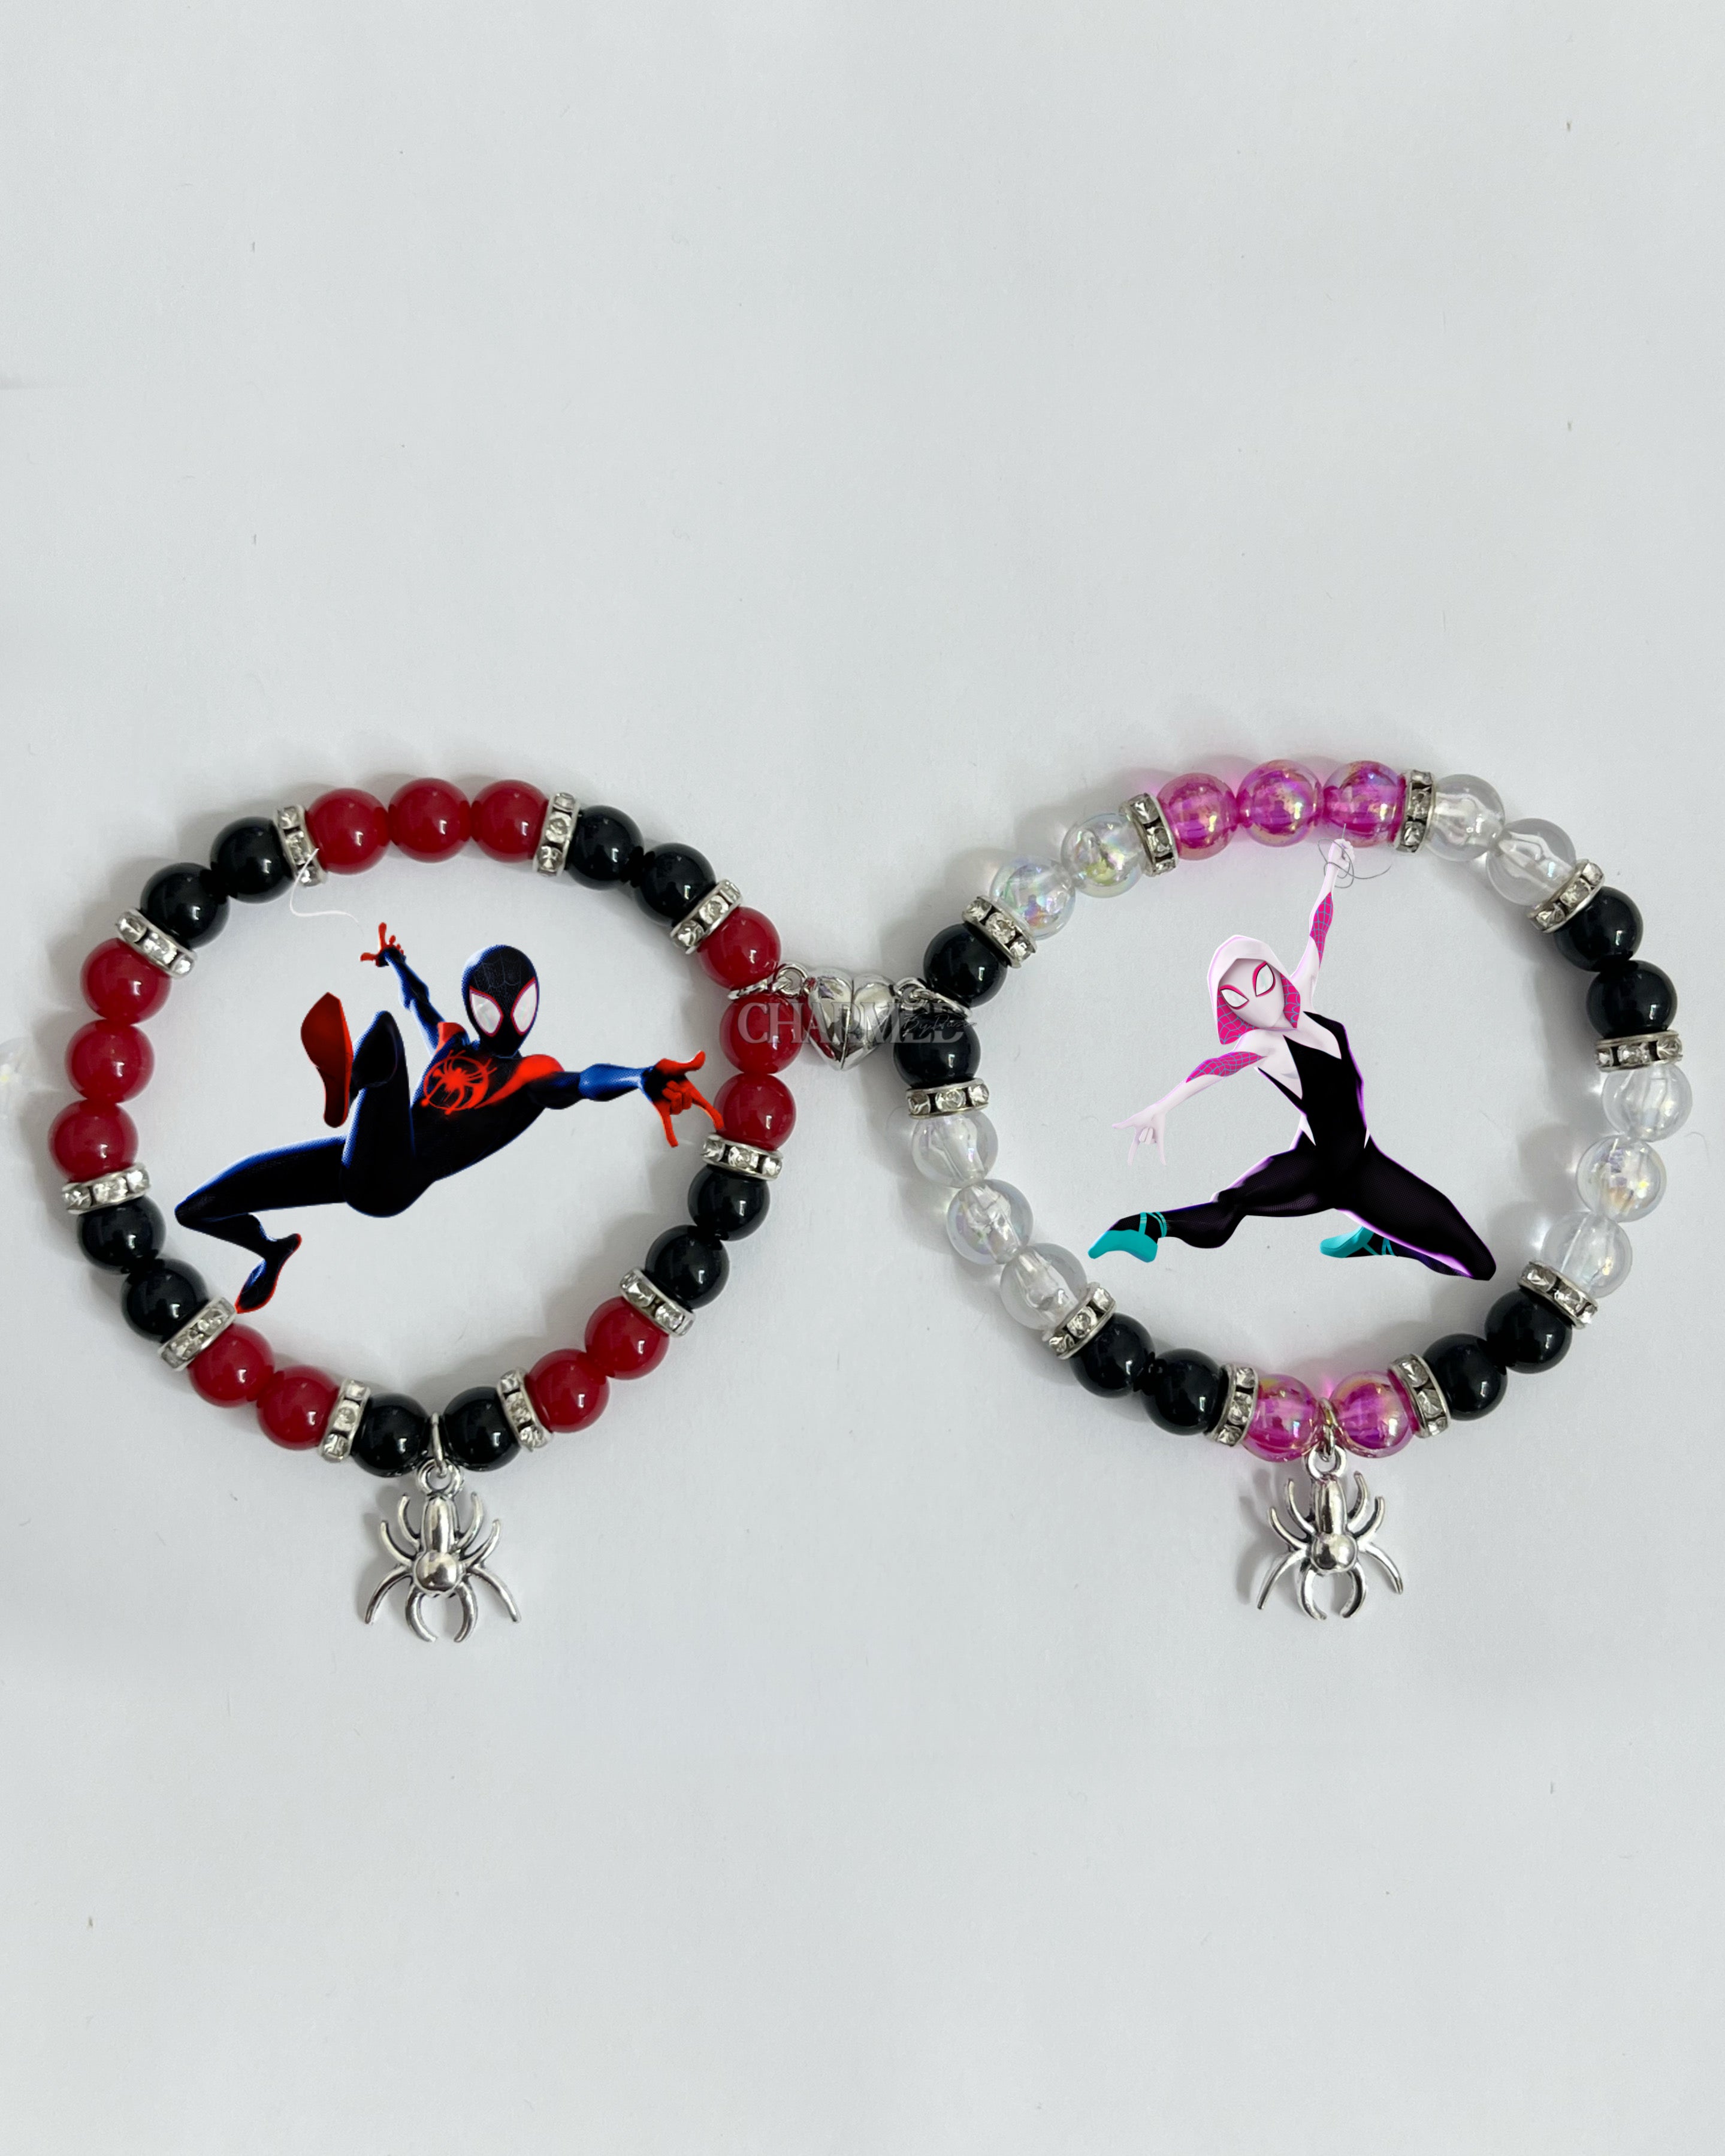 MATCHING BRACELETS – Charmed by Dasie